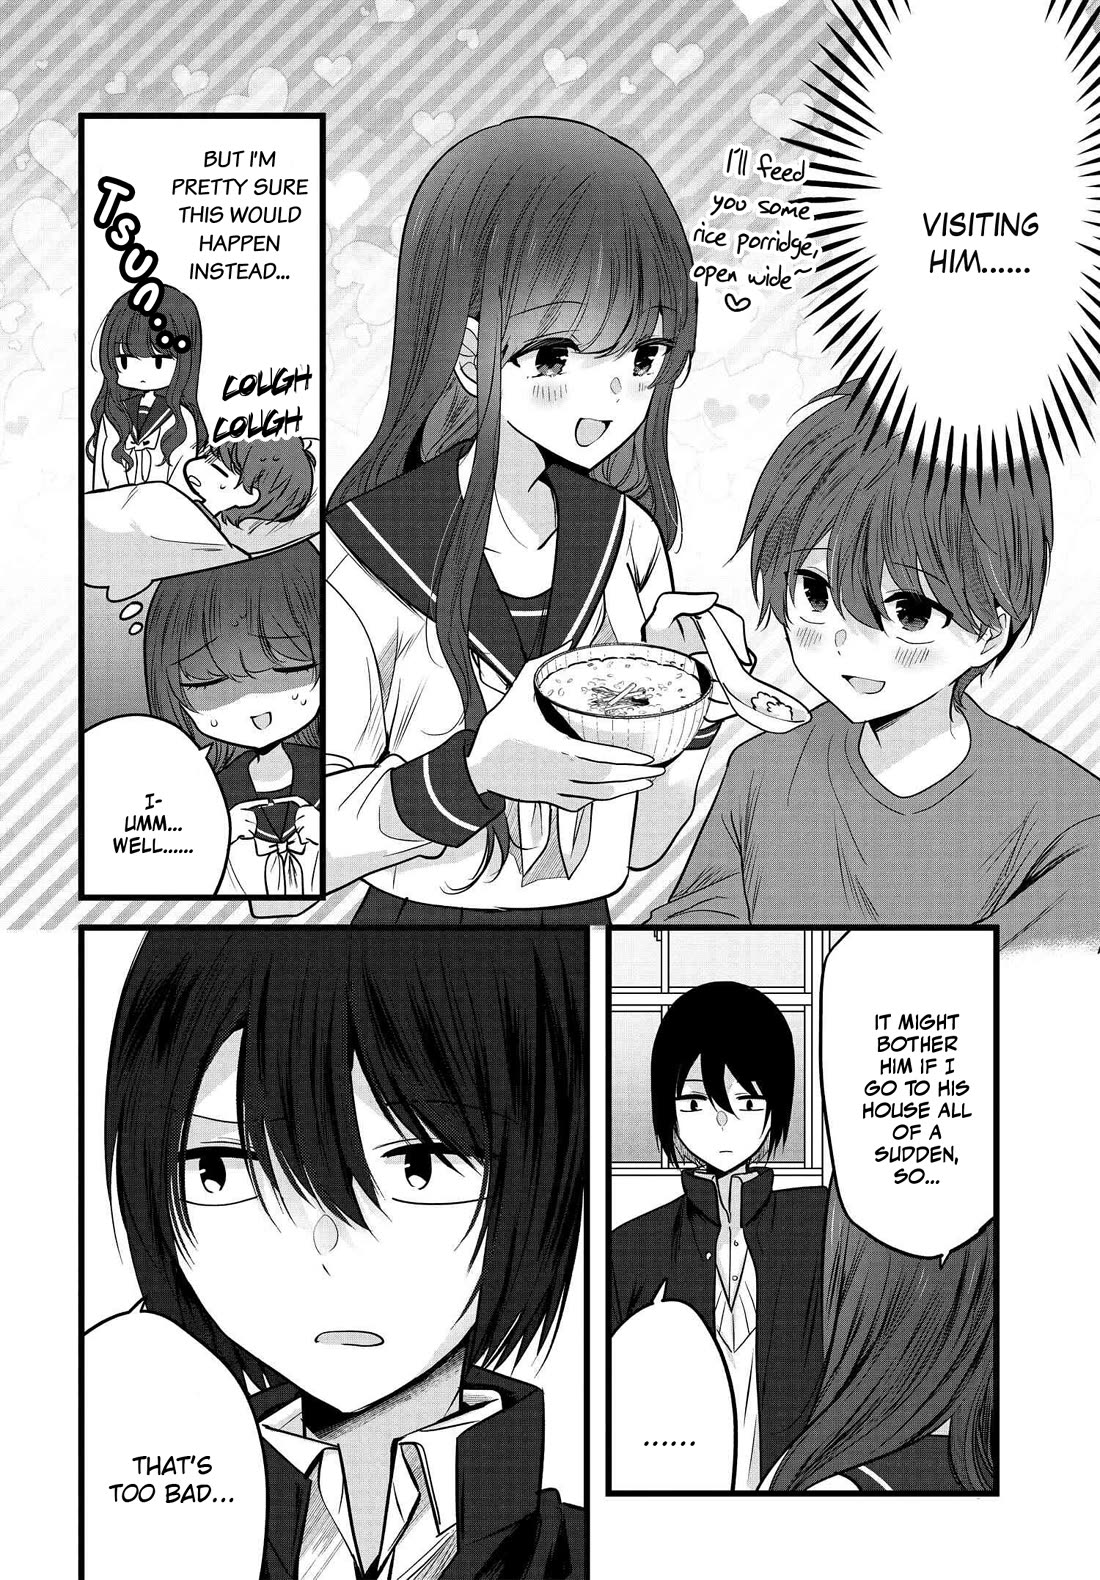 Tozaki-san Is Cold Only to Me - chapter 4 - #4